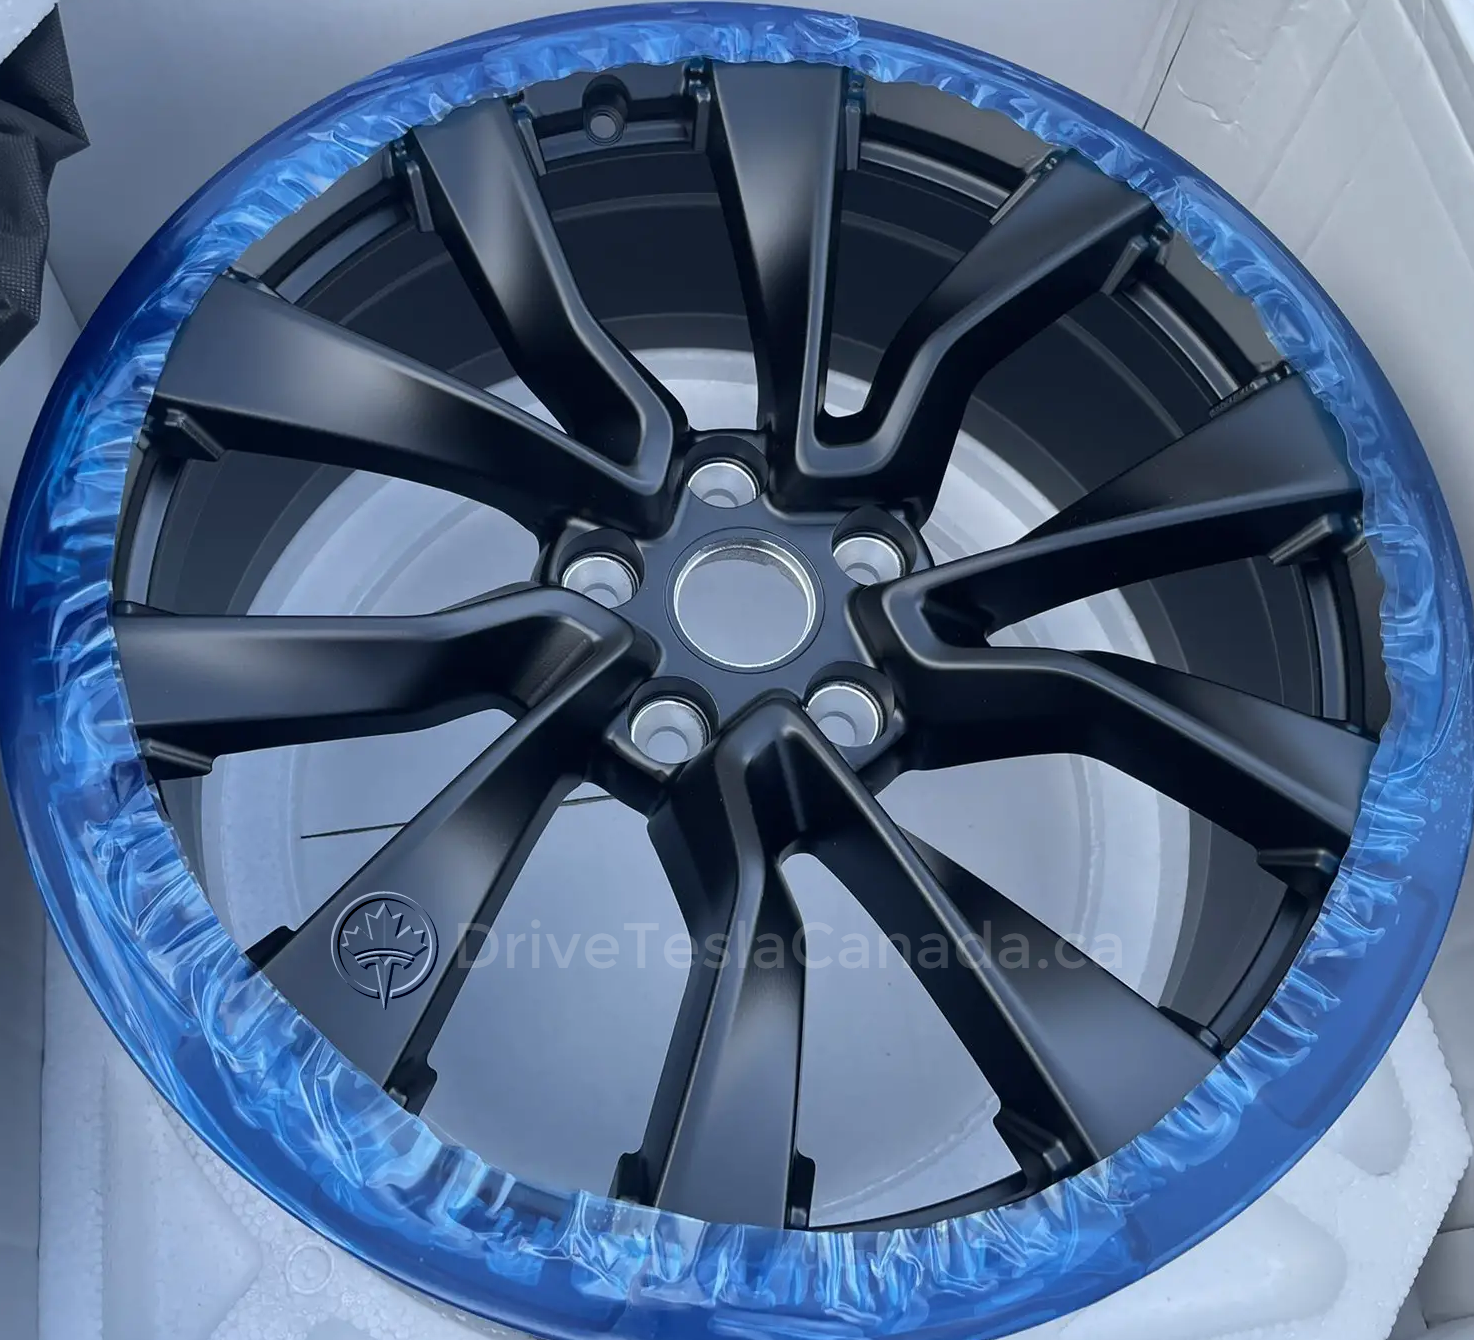 Here are the new Project Highland Tesla Model 3 wheel designs